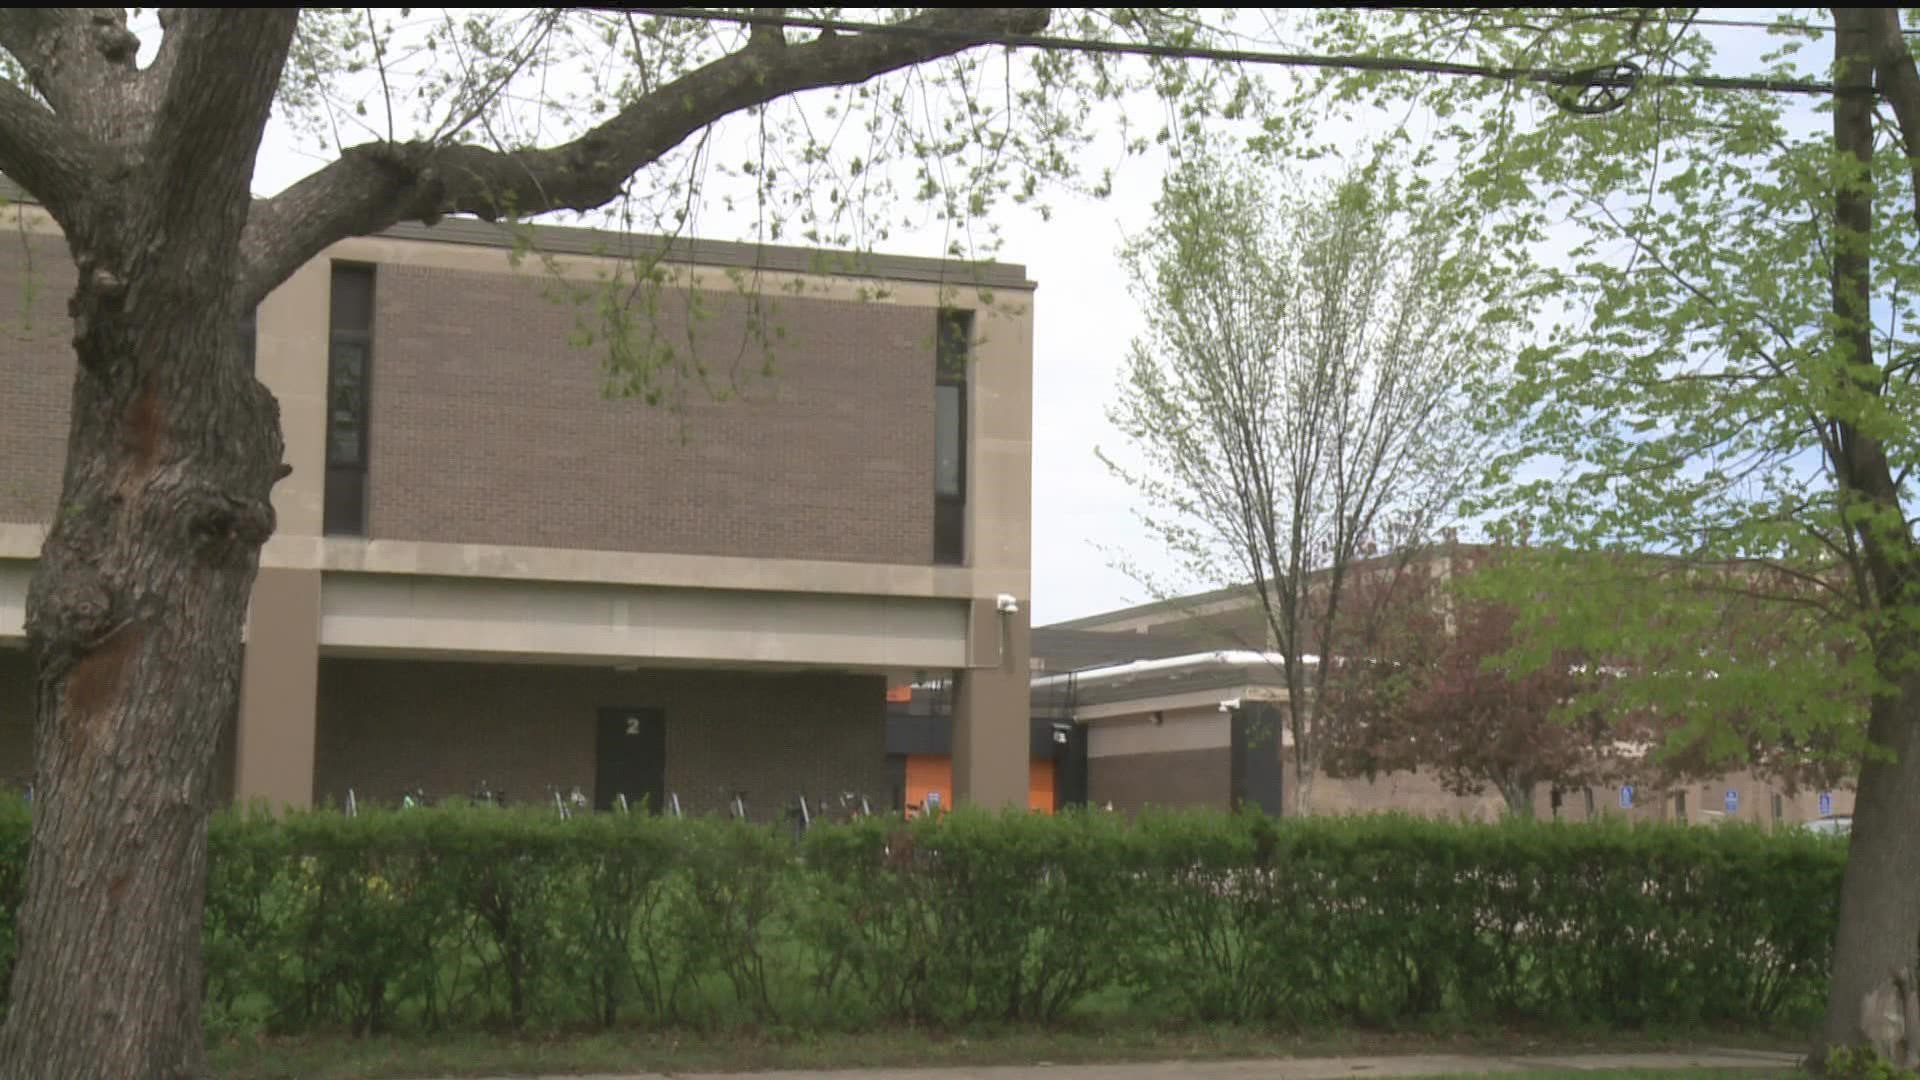 A parent of a South High School student told KARE 11 that the process of hiring a new principal is frustrating due to a lack of parental input.